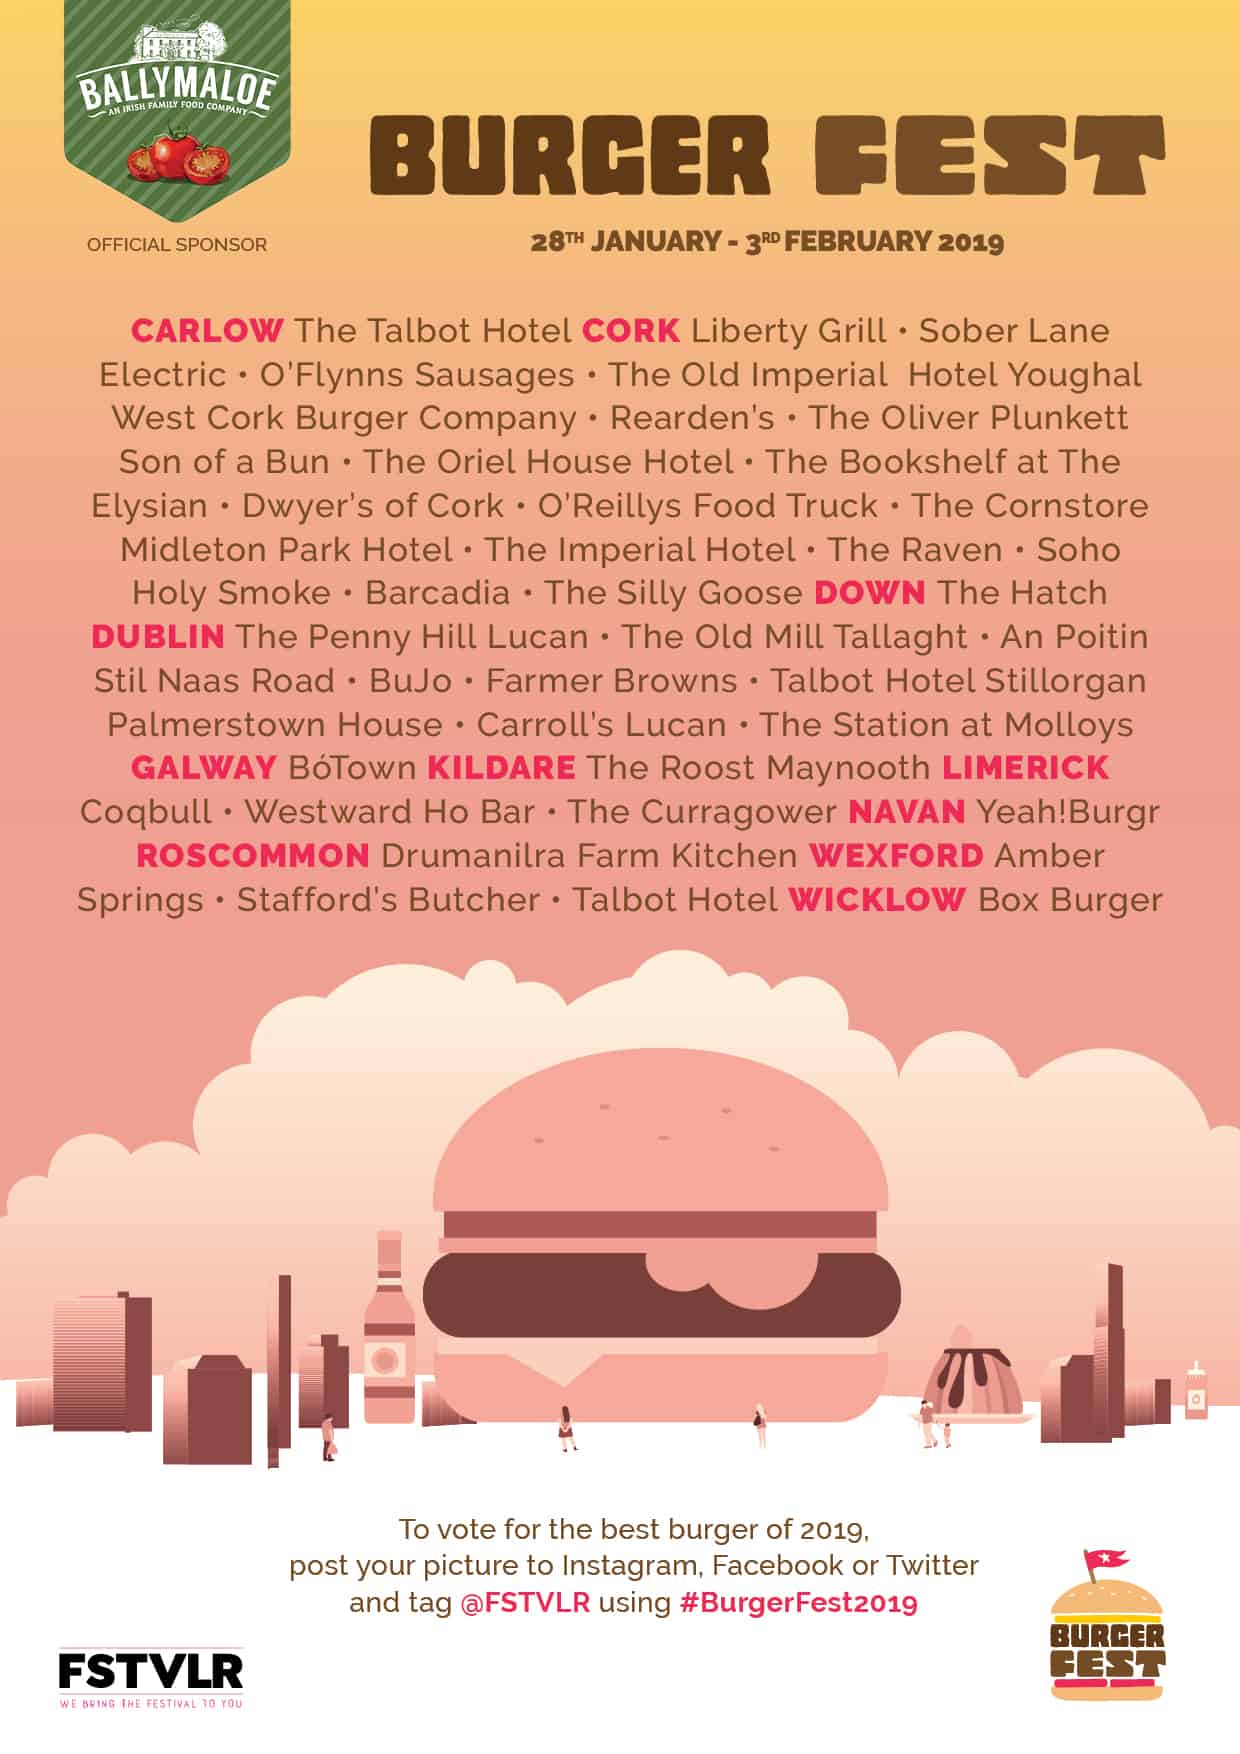 Burger Fest 2019 is a go this week Where is Ireland's best burger?